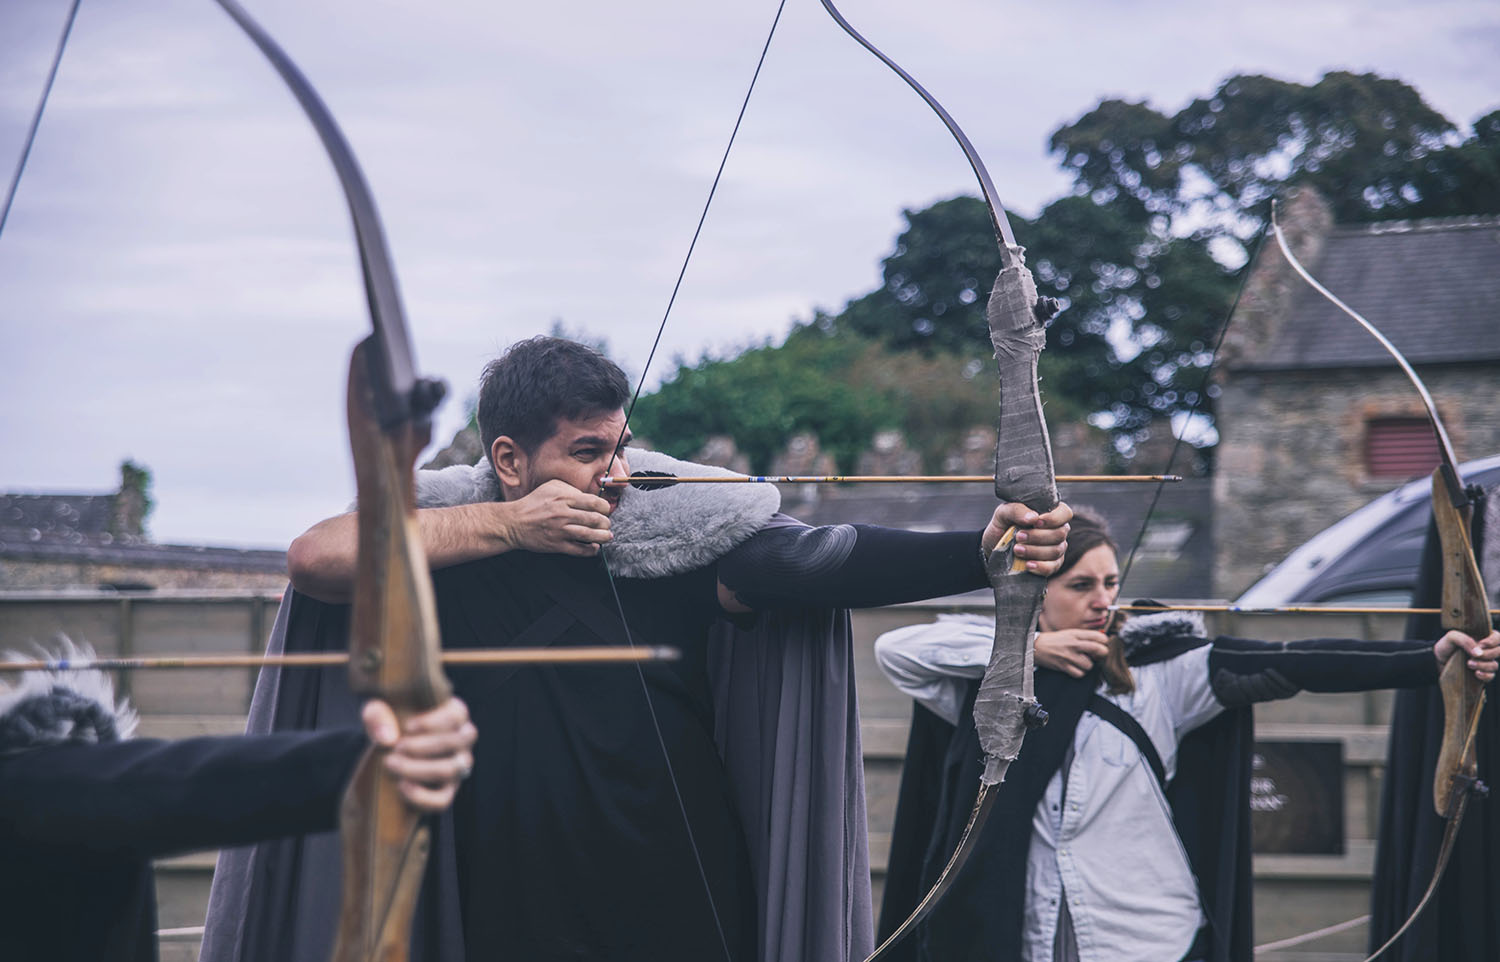 Game of Thrones archery experience at Winterfell Castle & Demesne